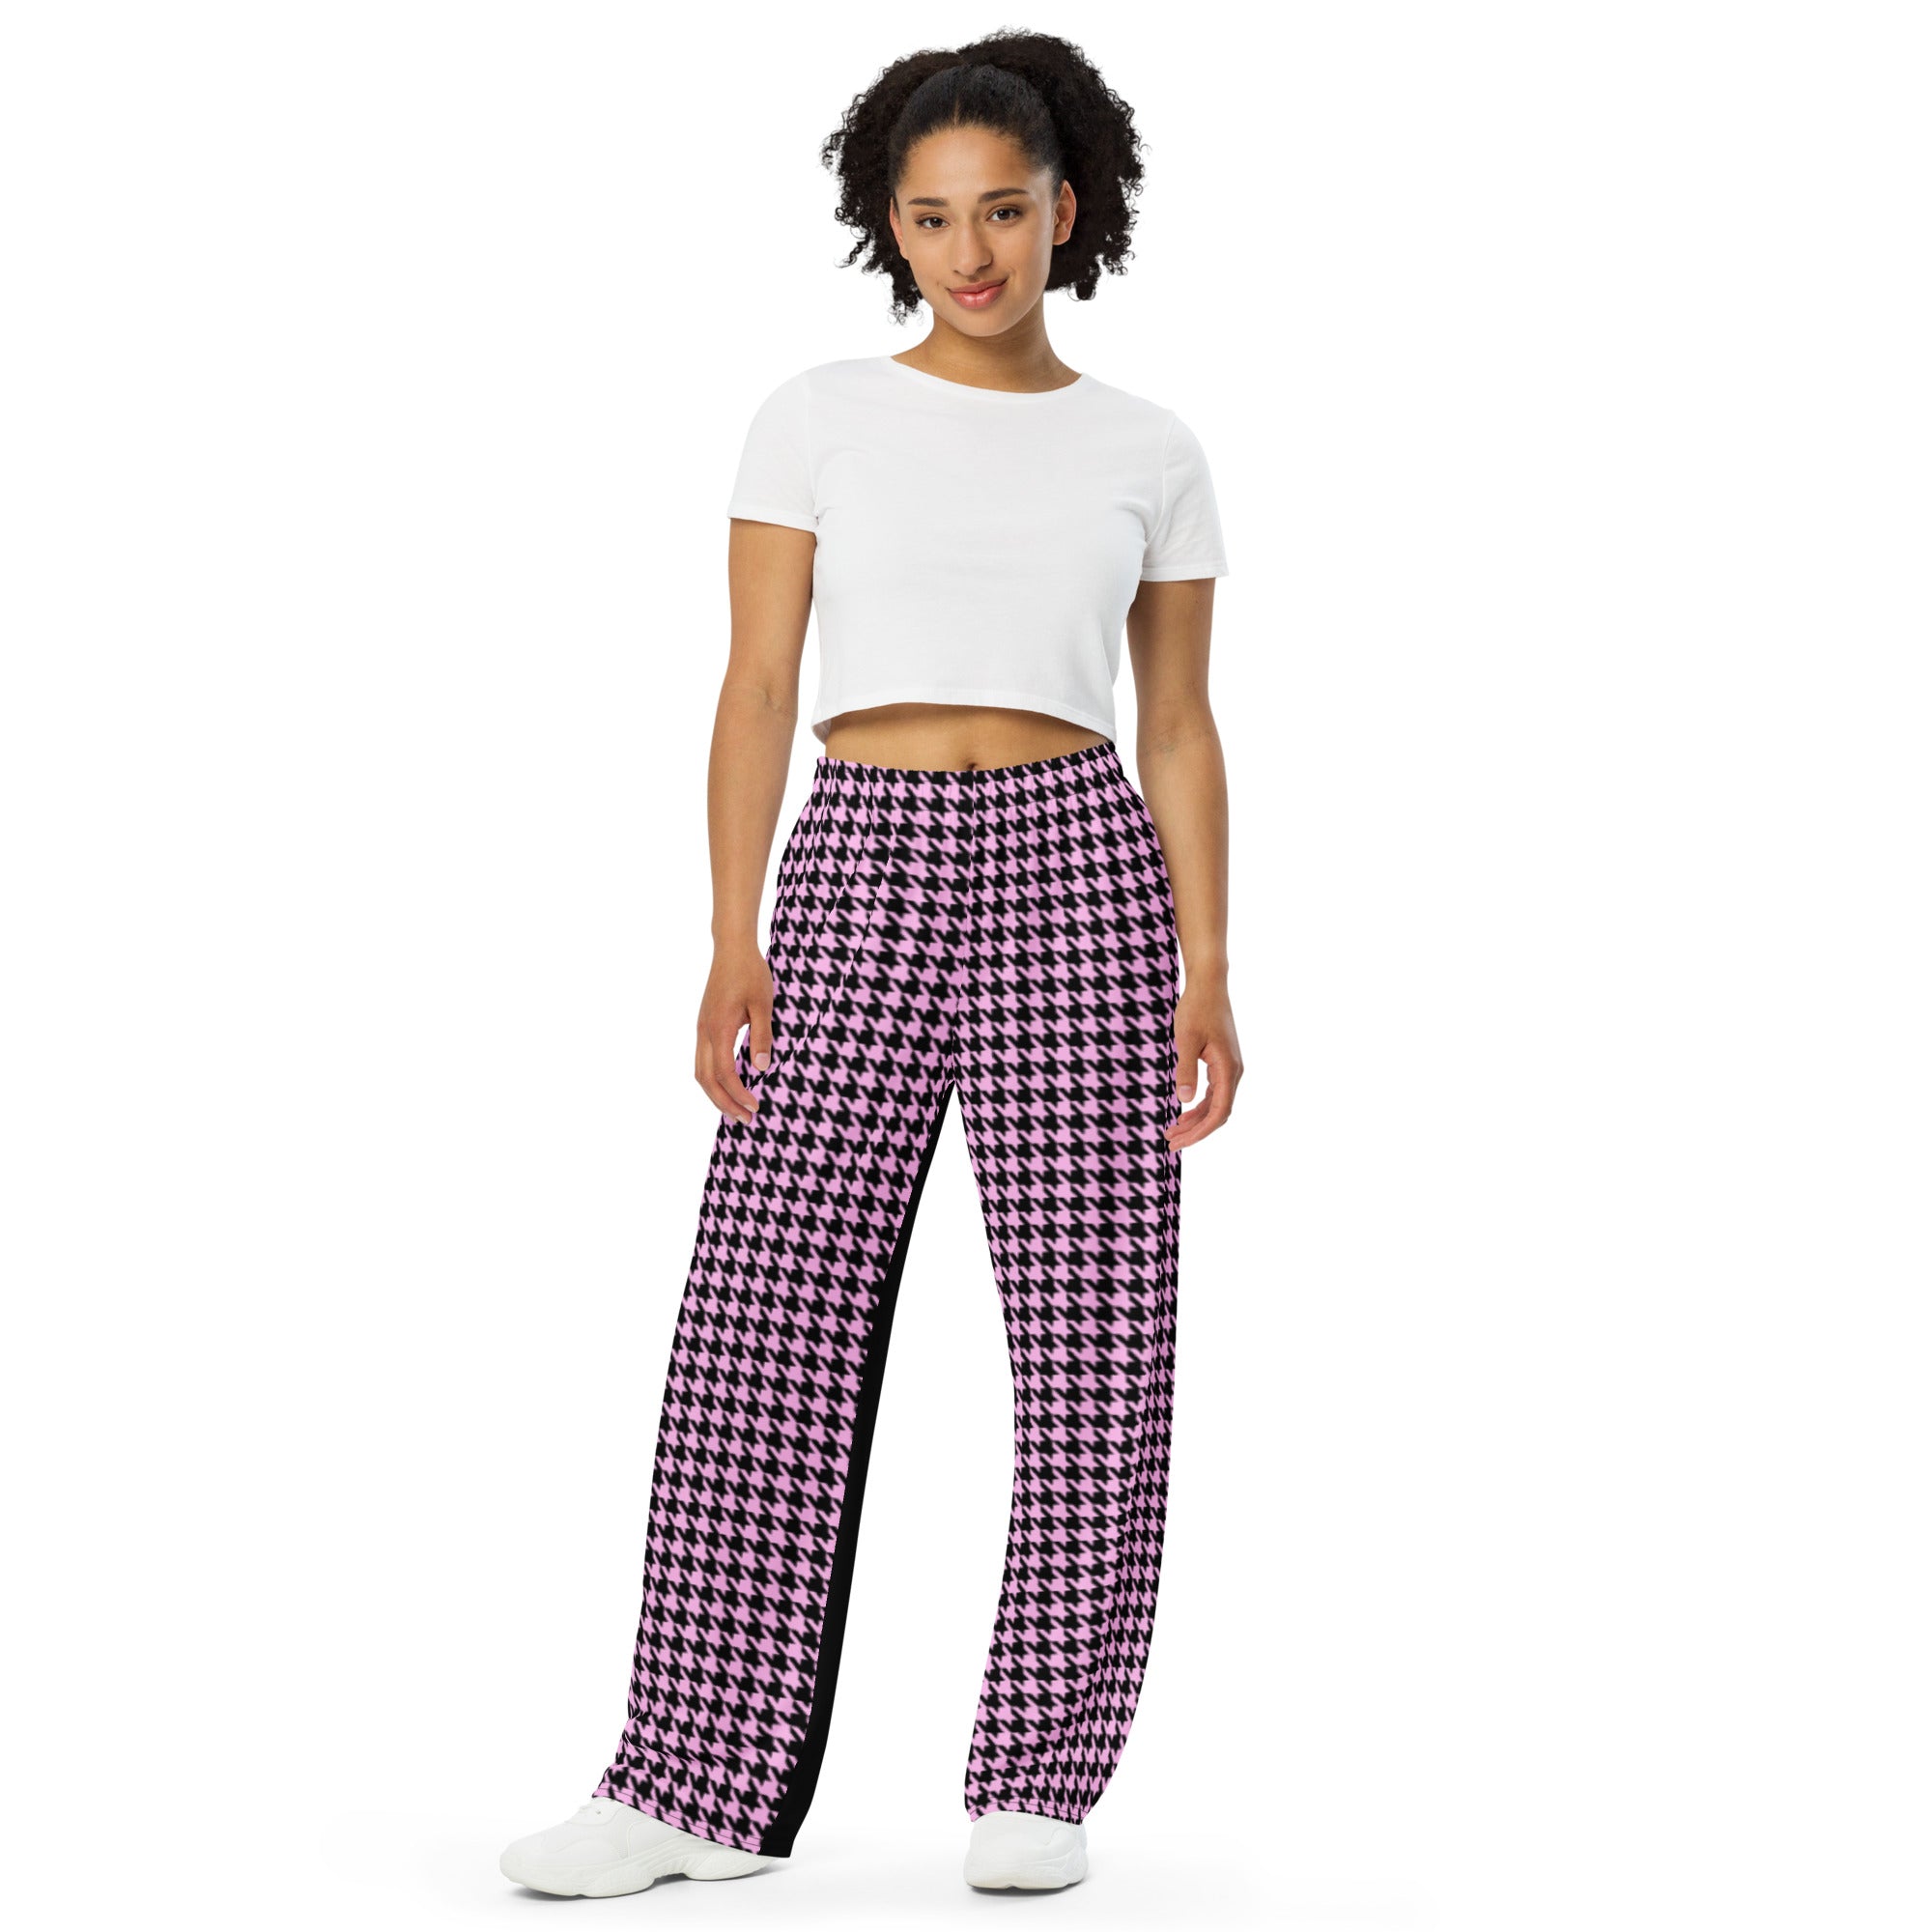 Pink and Black pattern Positive Vibes unisex wide-leg pants